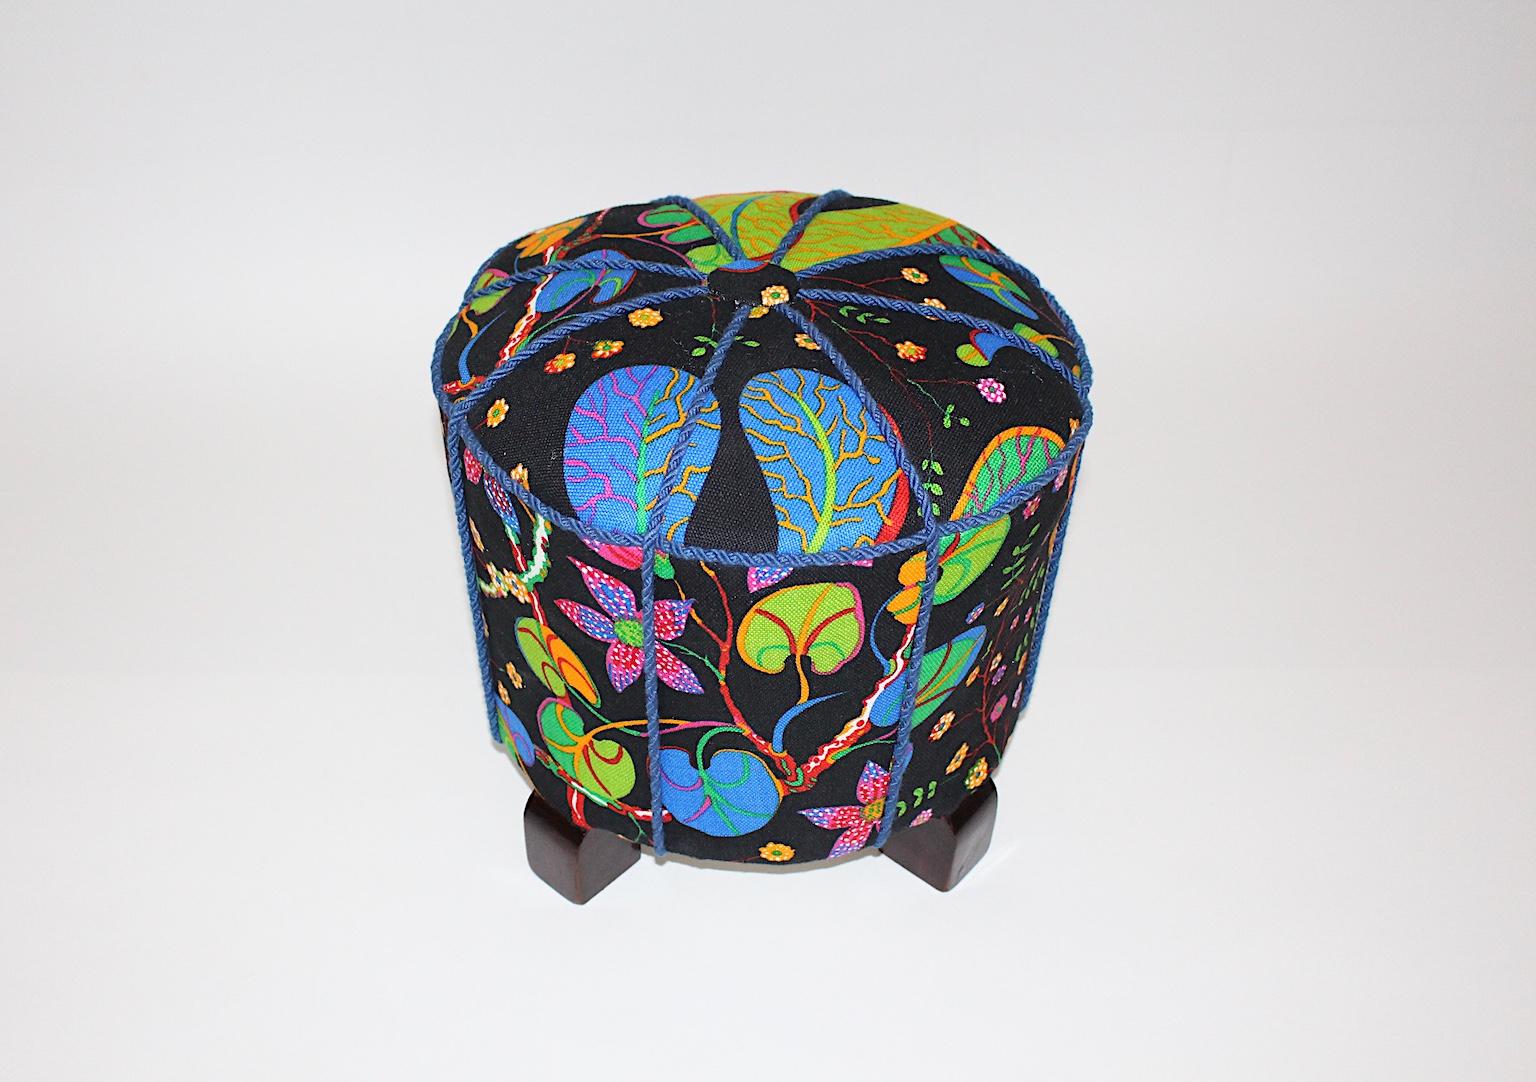 Art Deco Vintage Beech Pouf or Stool with Josef Frank Fabric, 1930s, Austria For Sale 2